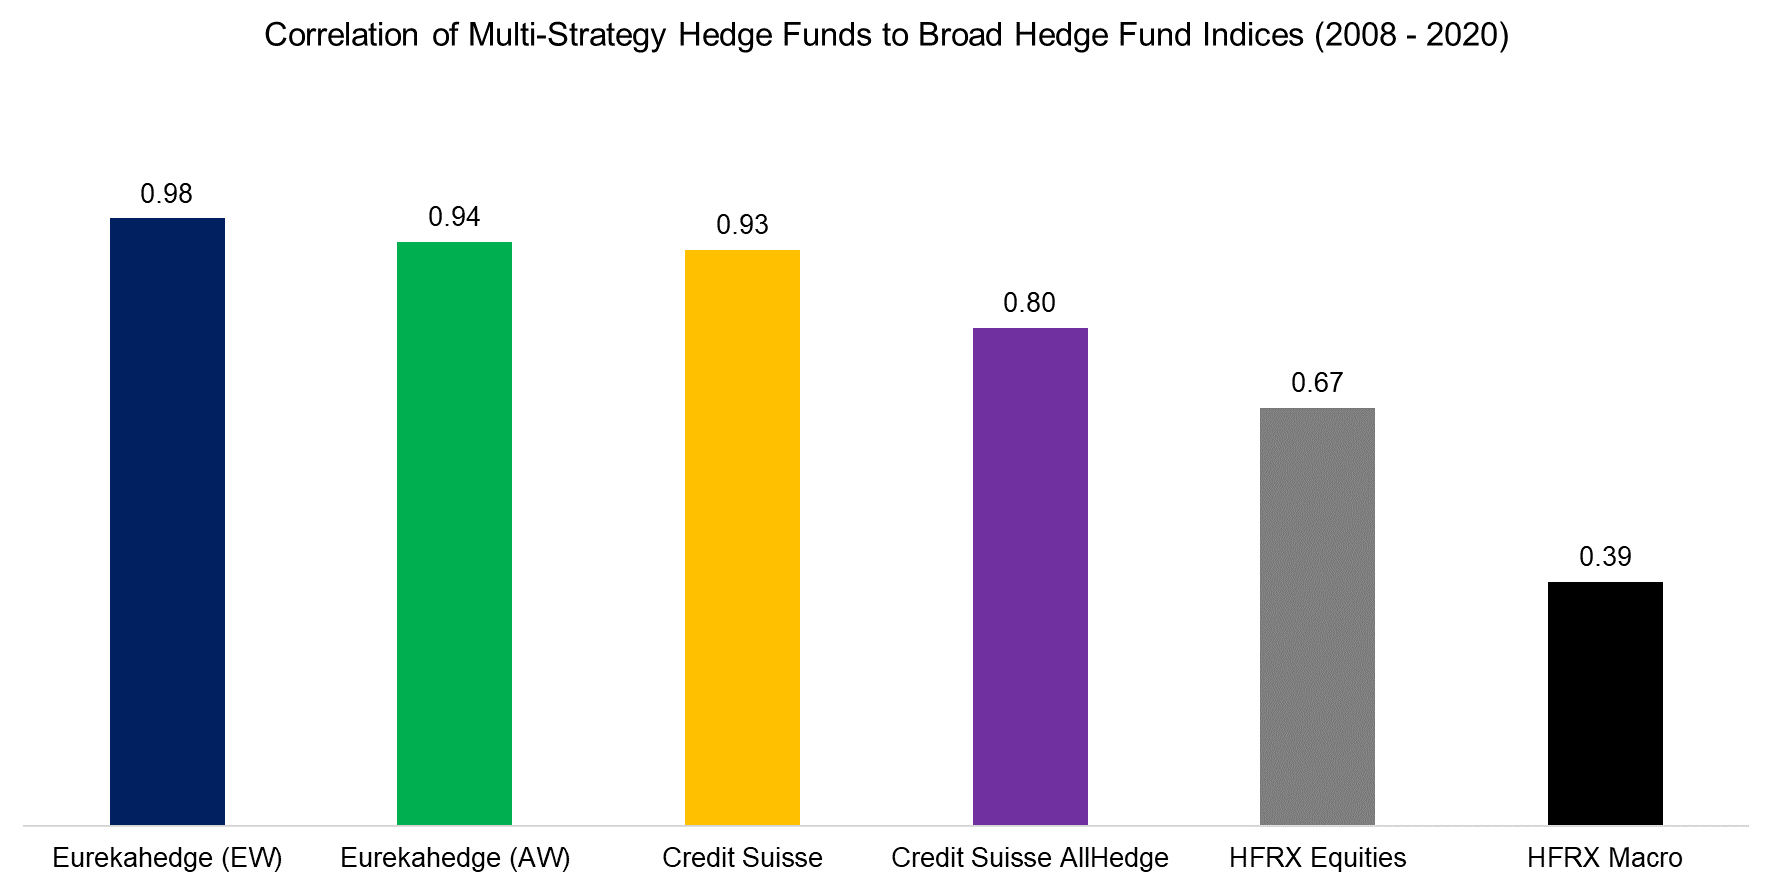 Correlation of Multi-Strategy Hedge Funds to Broad Hedge Fund Indices (2008 - 2002)